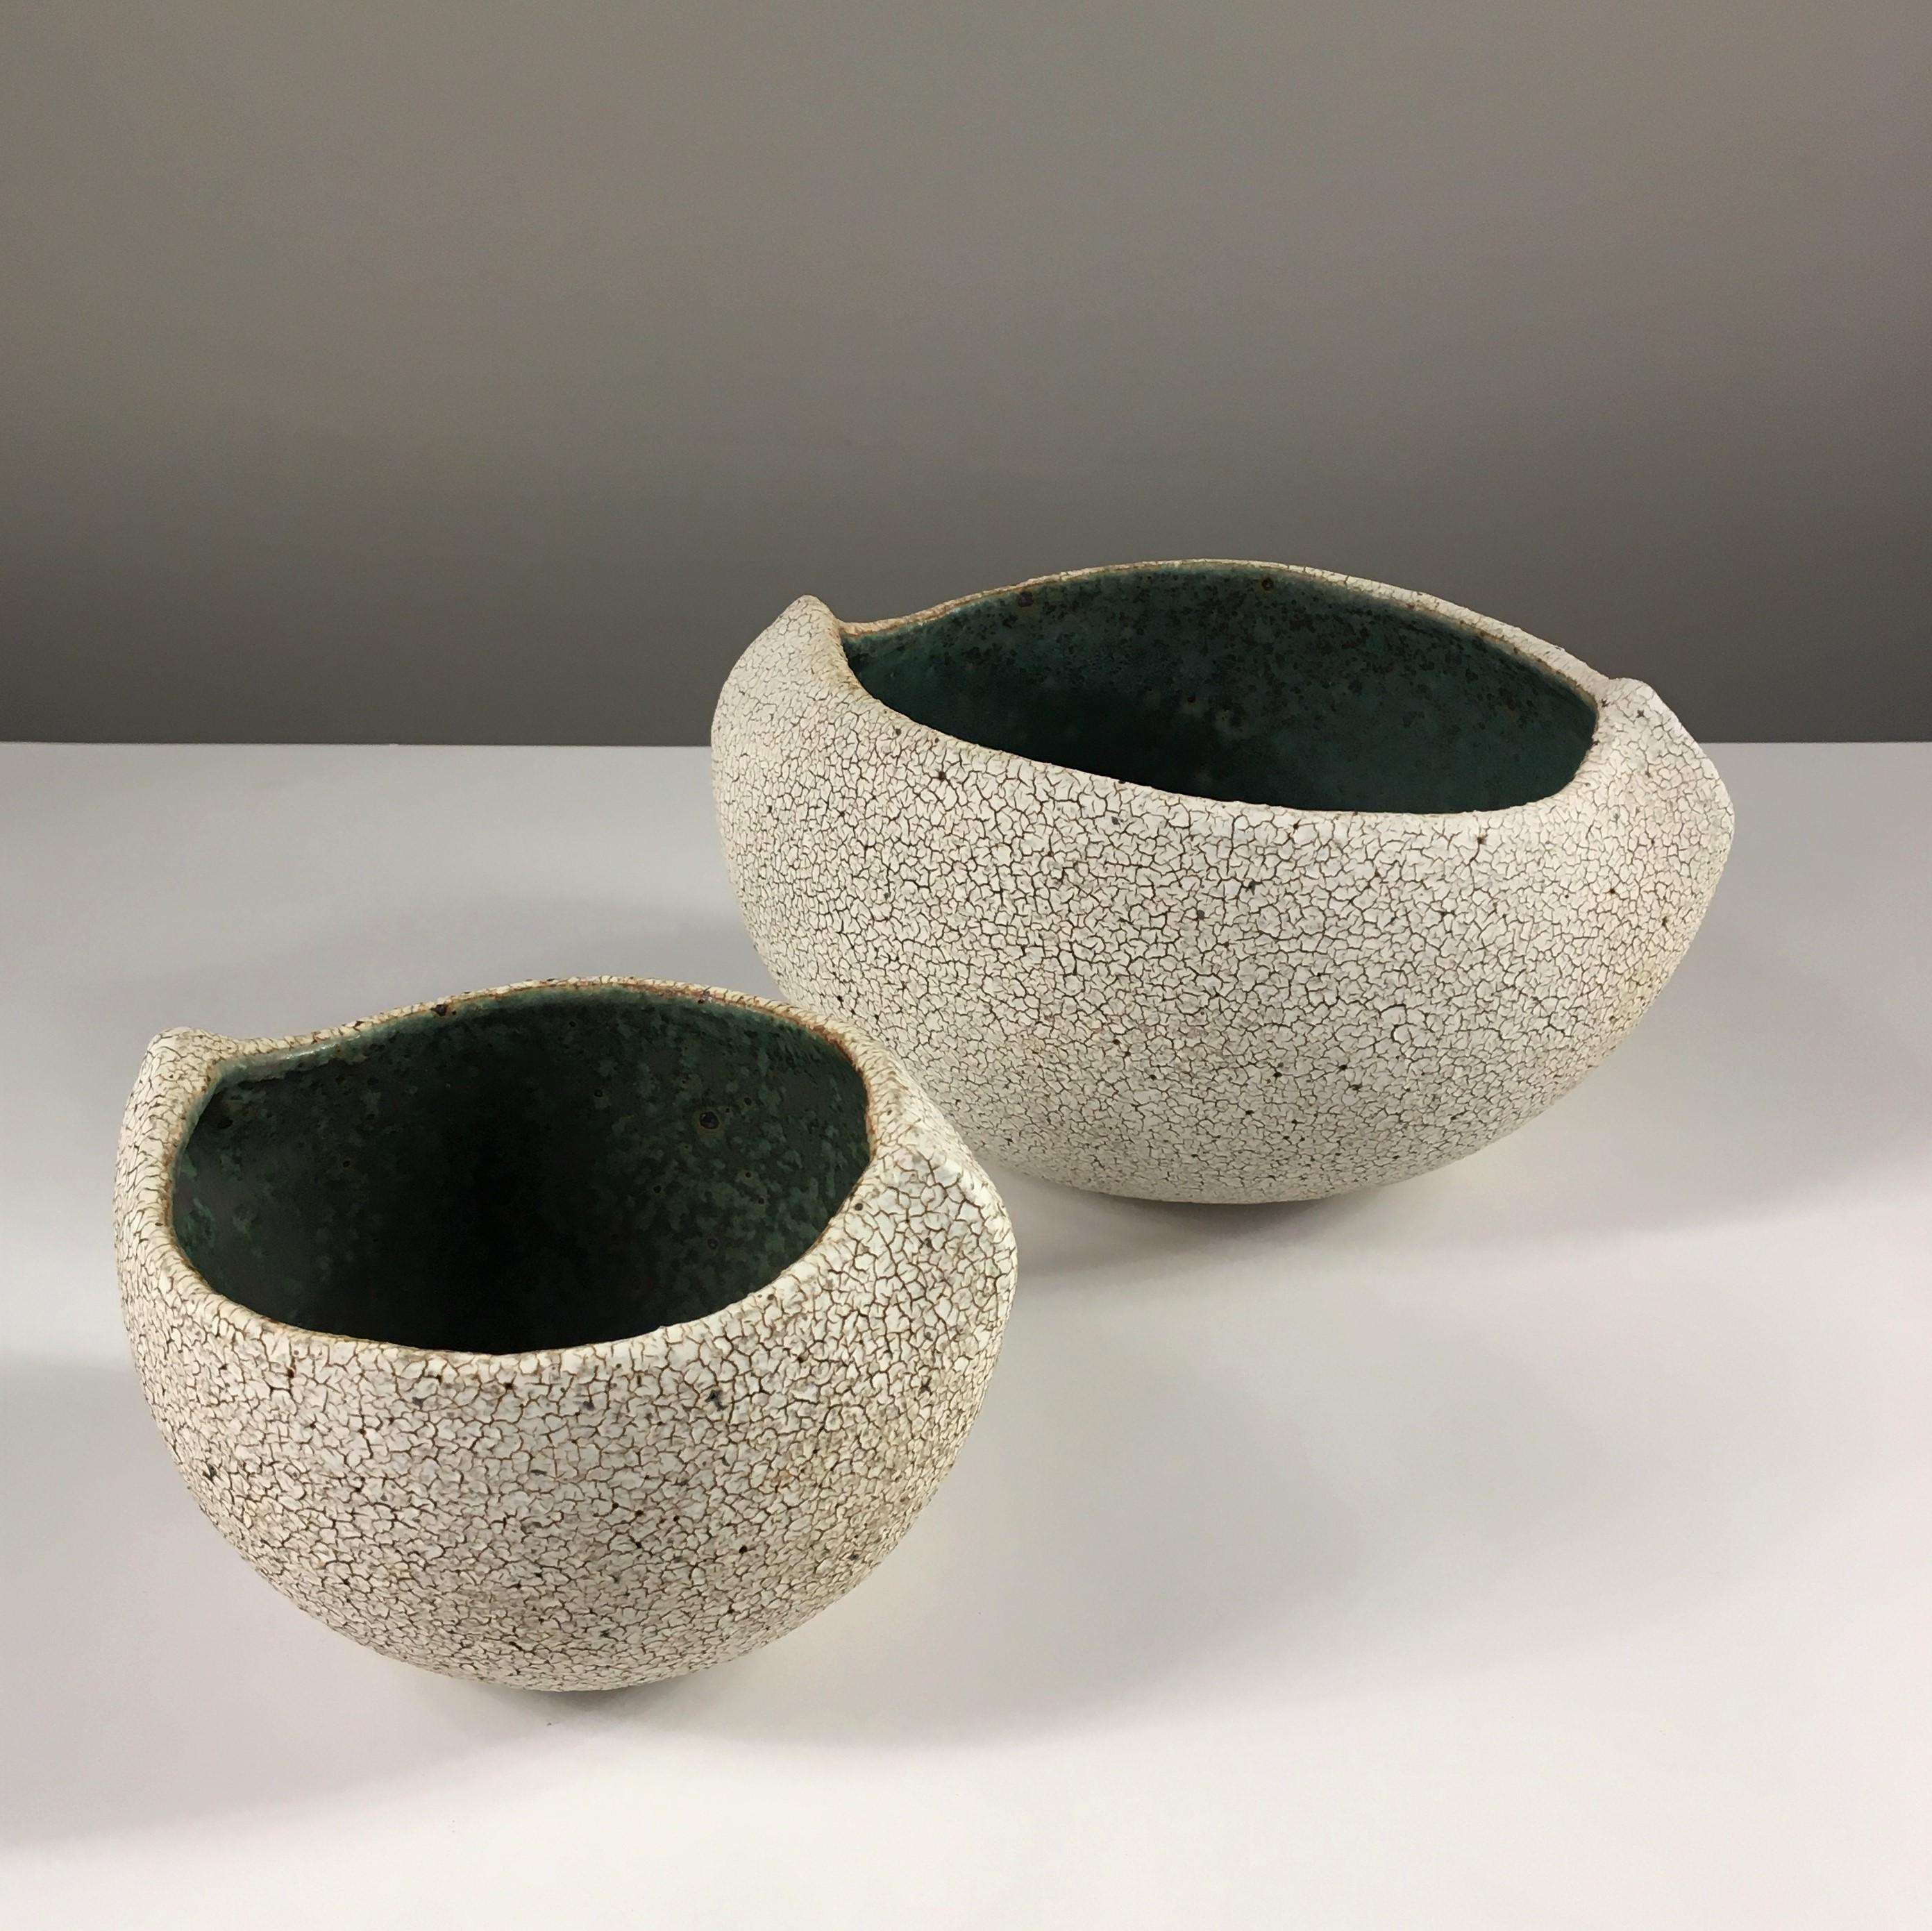 Set of 2 Boat Shaped Bowls with Glaze by Yumiko Kuga. Dimensions: W 7